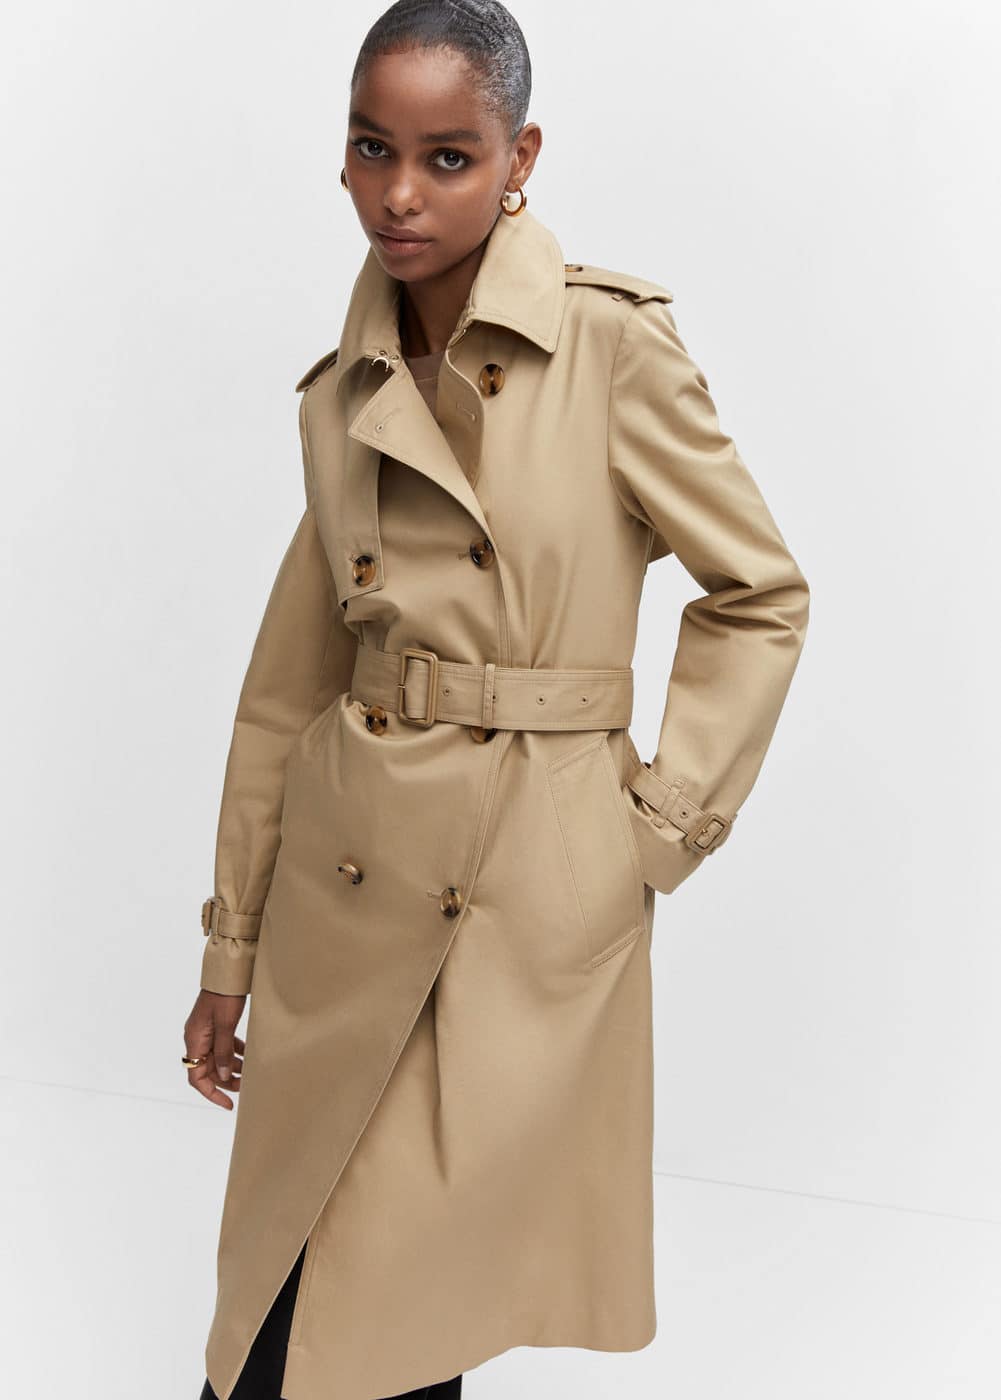 trench coat and loafer outfits 305356 1693485349762